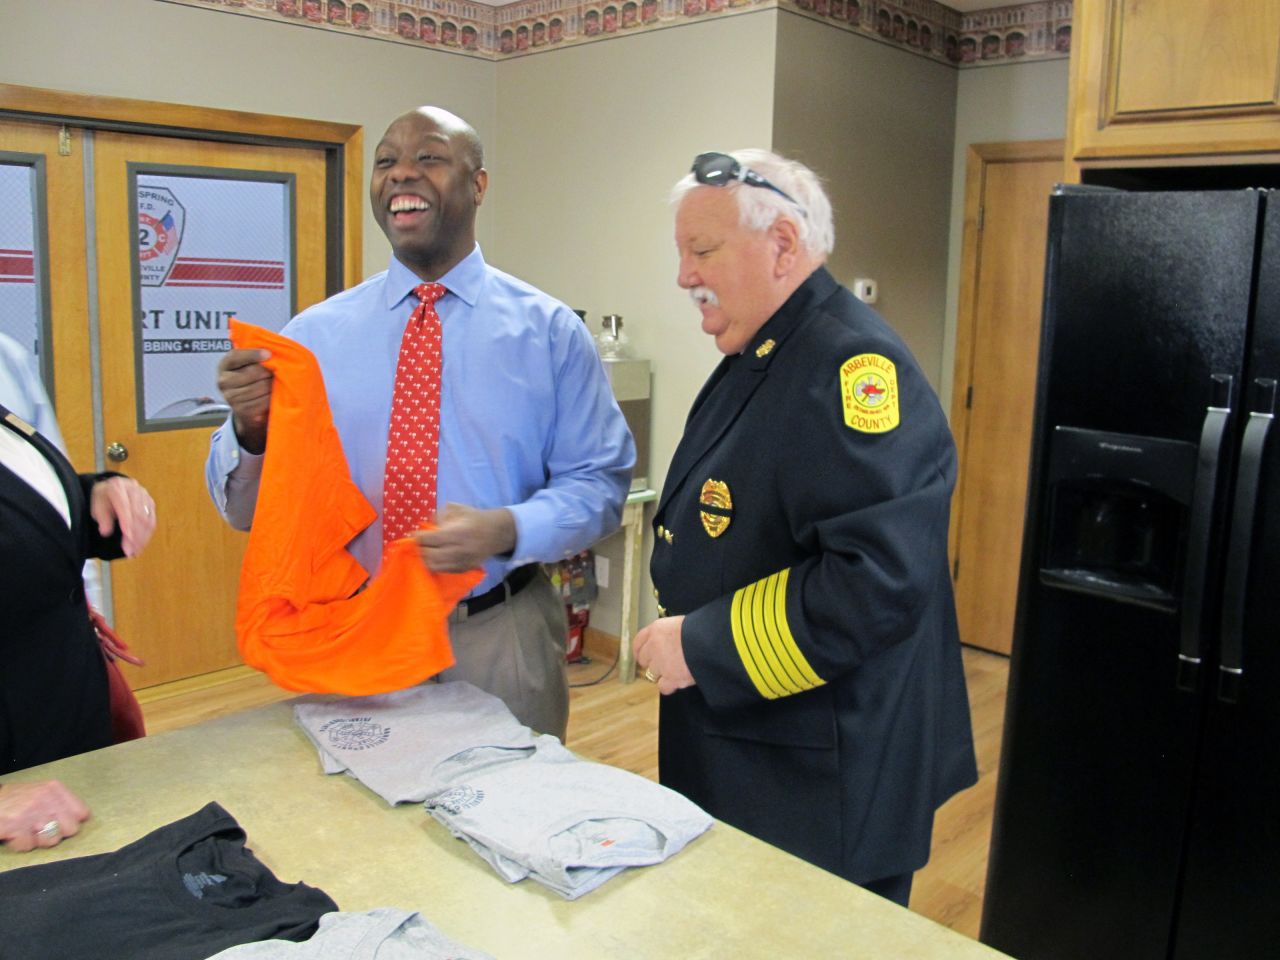 Scott accepts a T-shirt from Abbeville County Fire Marshal Dan Edatt during a visit in August 2013. Scott was finishing up a tour of all of South Carolina's 46 counties. He won an election the next year to serve the final two years of DeMint's term.